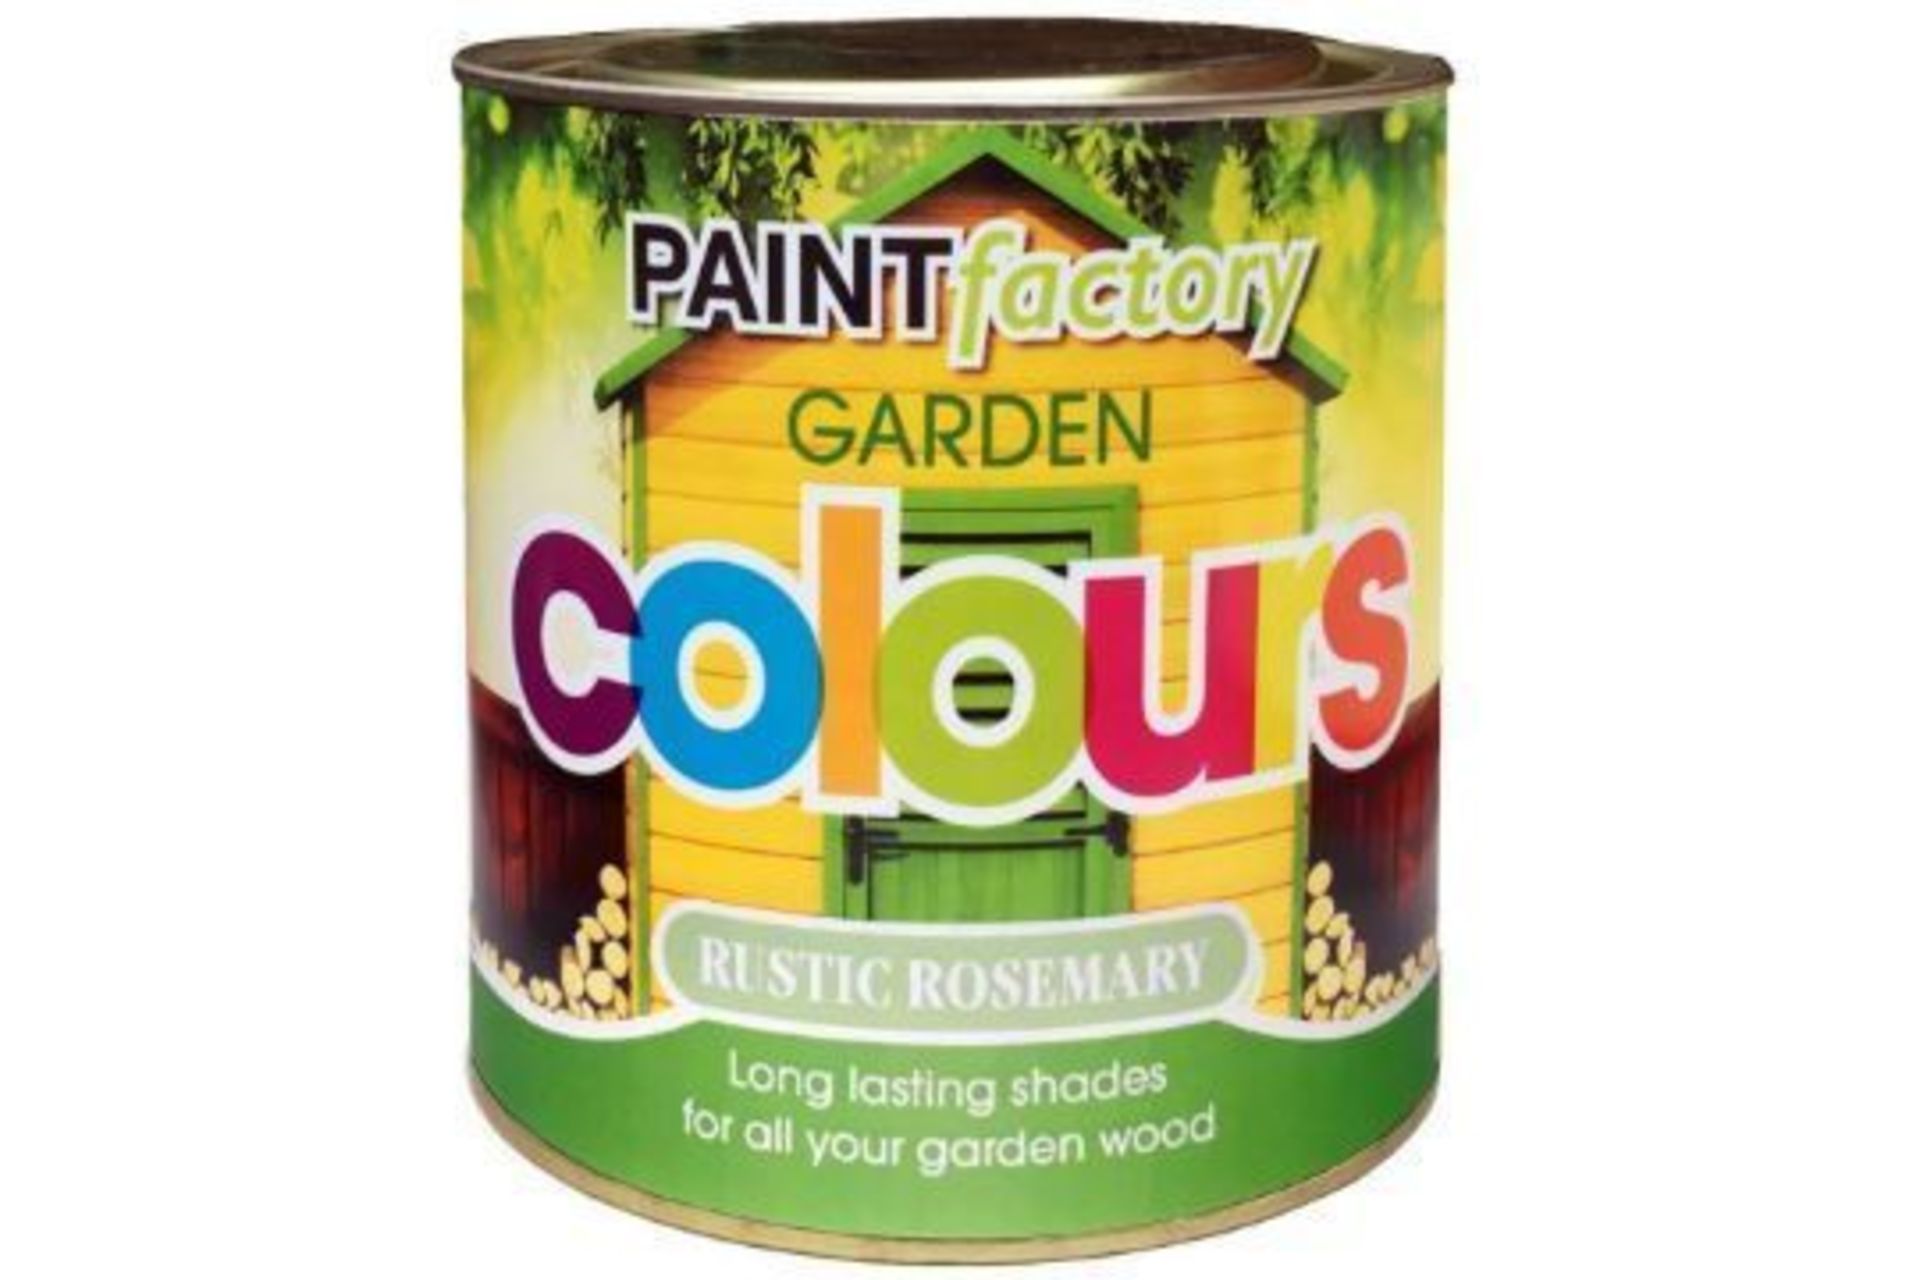 Rustic Rosemary Green Lasting Shades Garden Paint Wood Shed Furniture 650ml